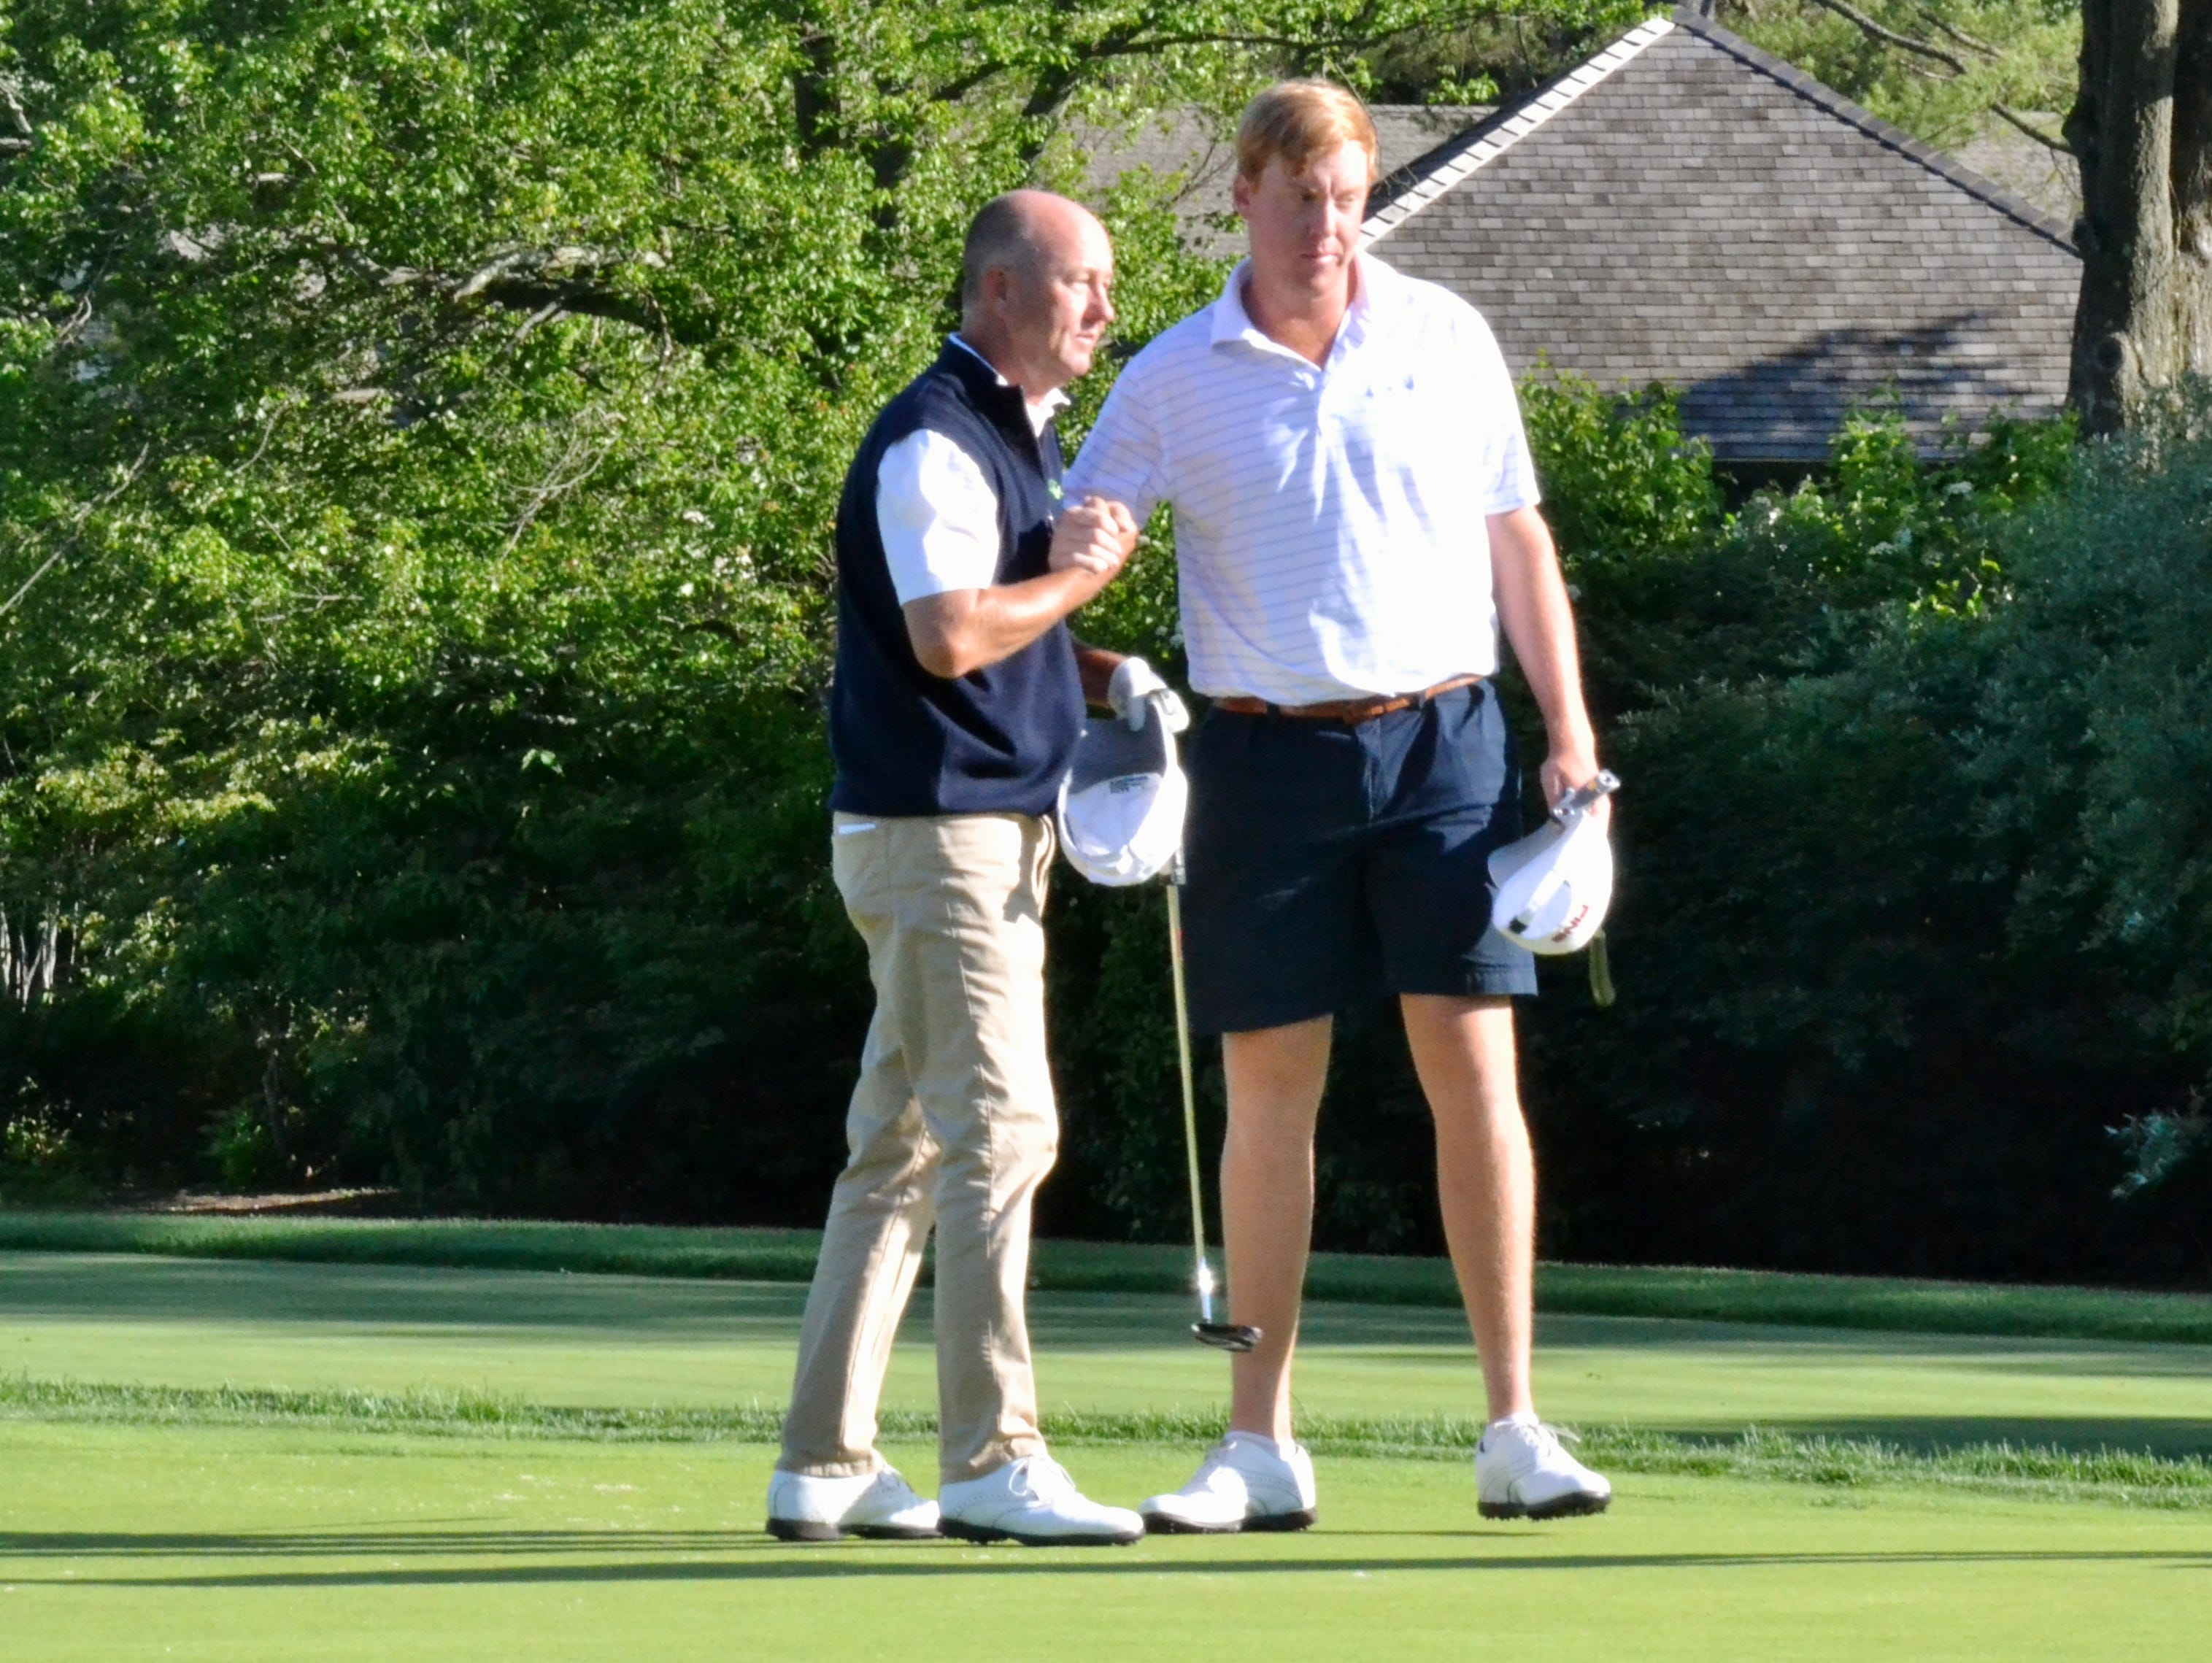 Mark Love and Dru Love shake hands after shooting a 75 on Thursday in the opening round of the Anderson Memorial at Winged Foot